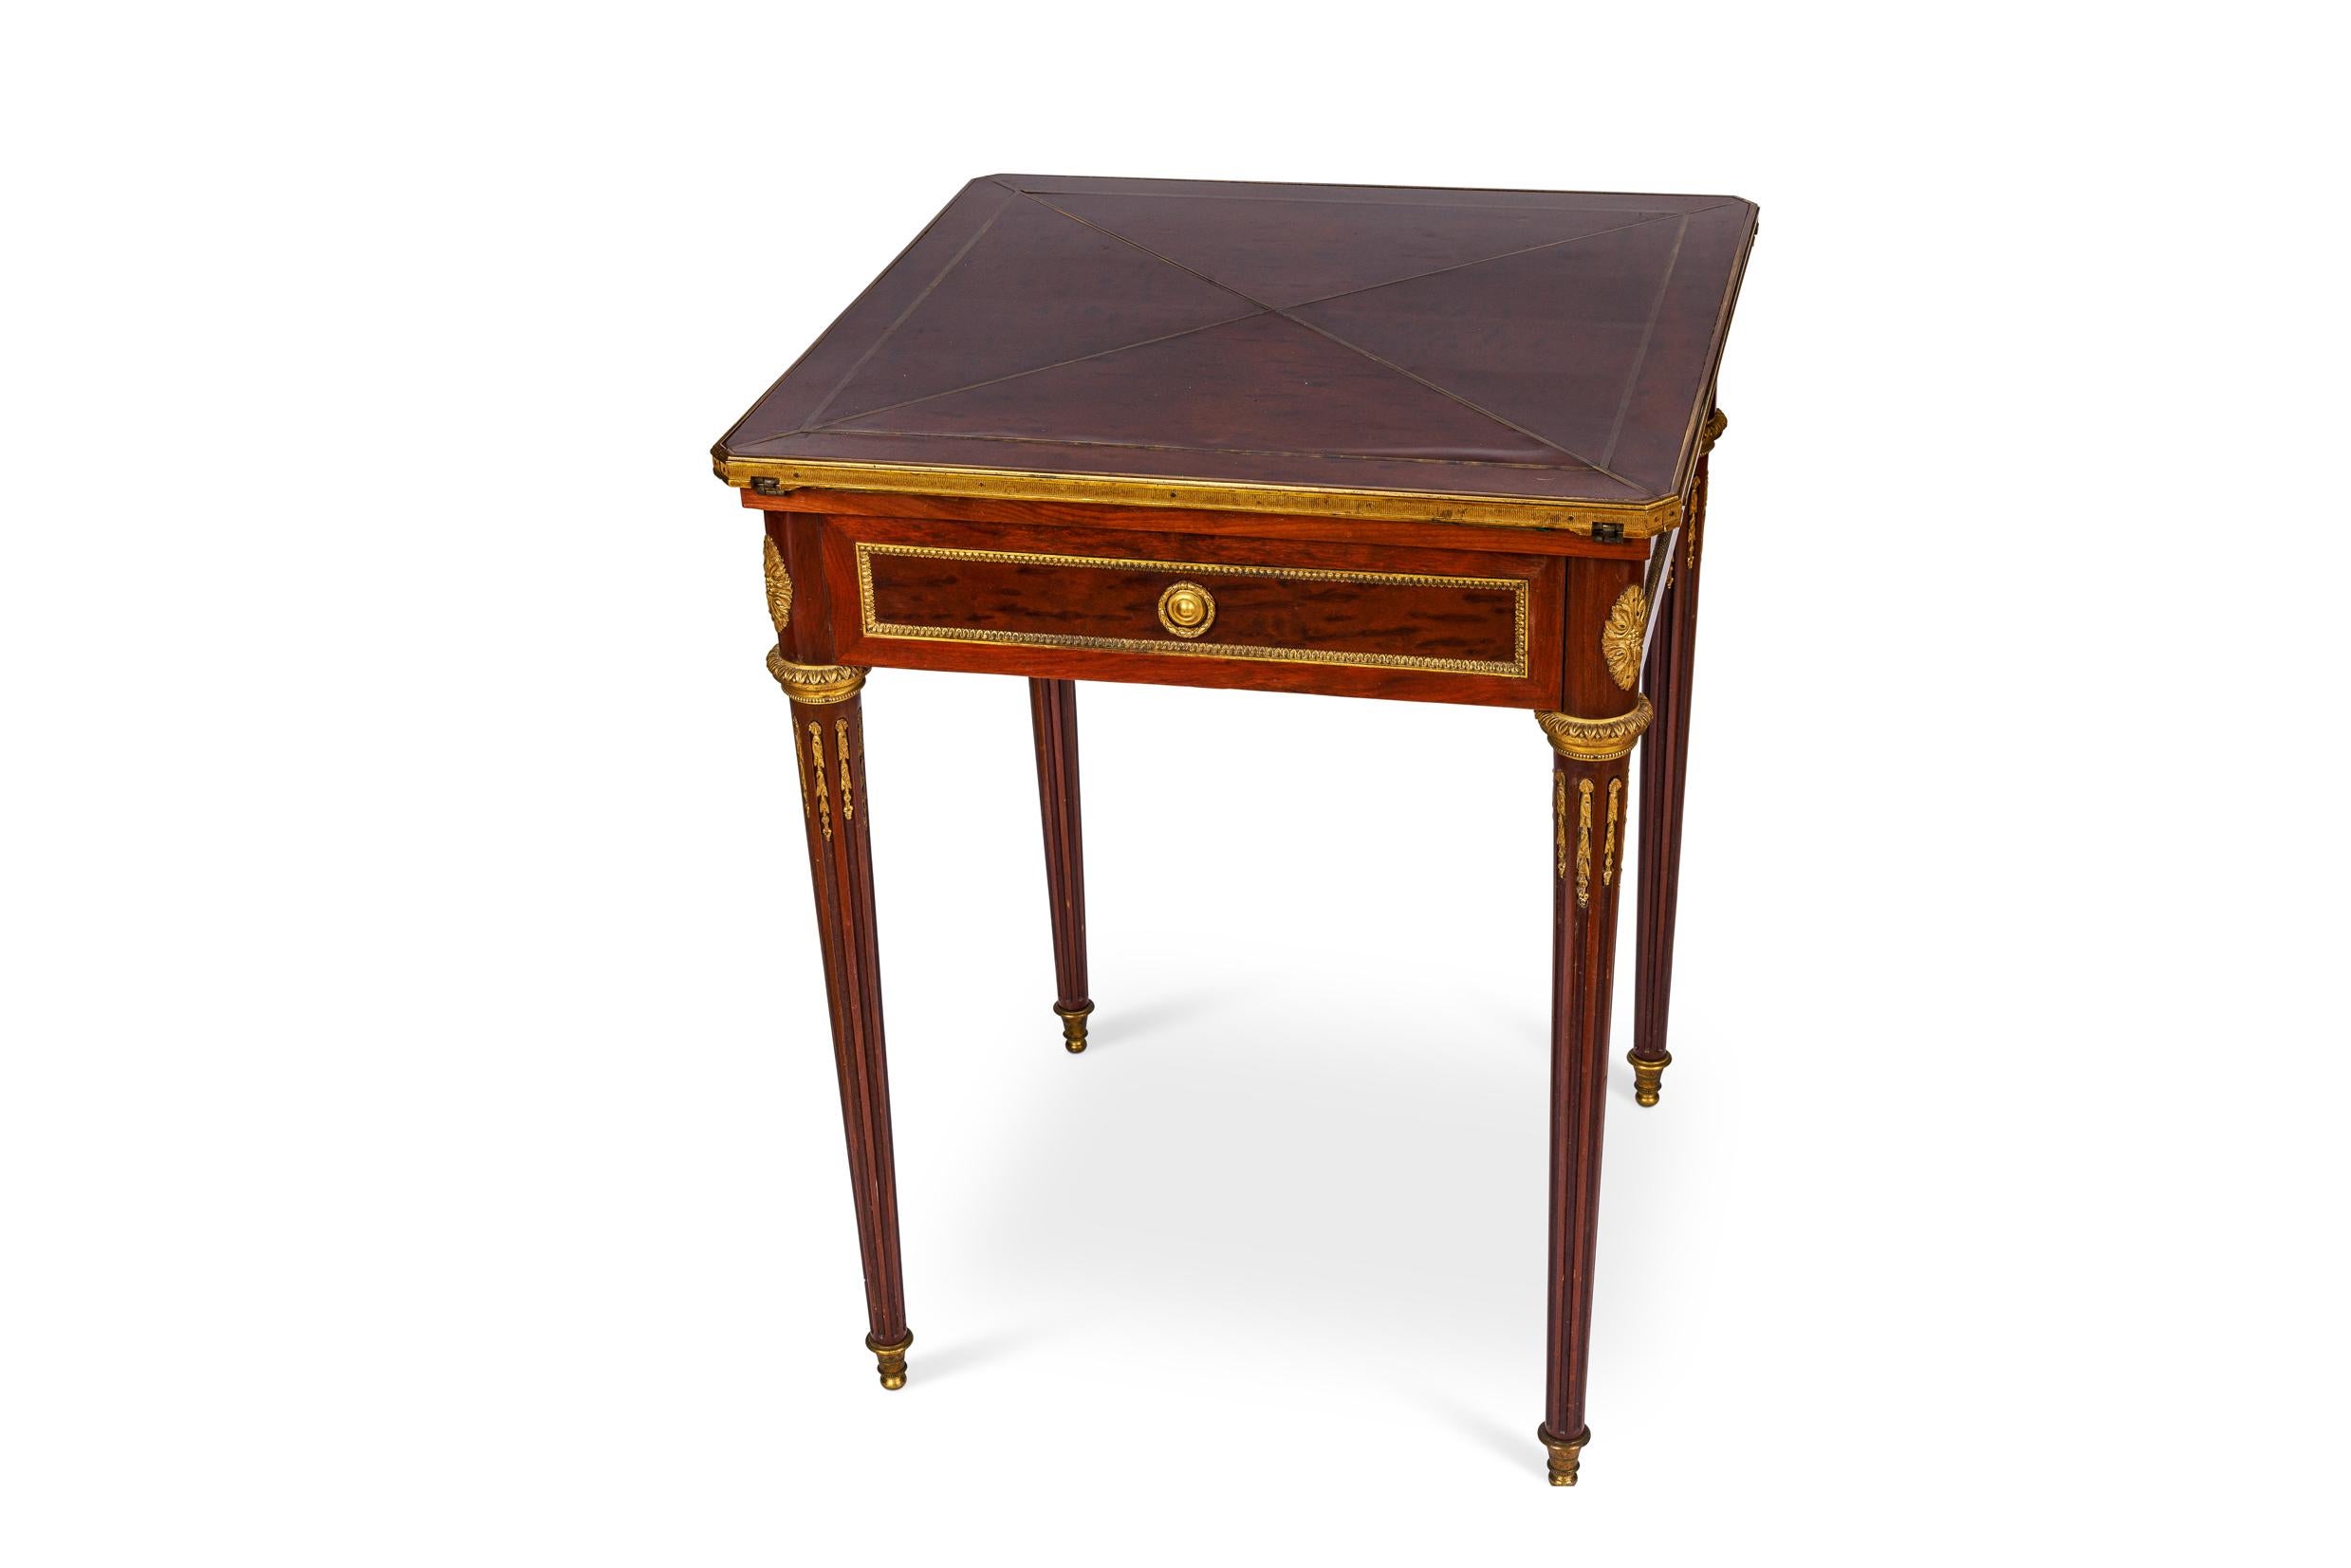 A French Antique Ormolu-Mounted mahogany envelope games card table, C. 1870, attributed to Henry Dasson. 

A very elegant and high quality, French Louis XVI style, mahogany and bronze mounted games table - perfect for playing cards. The table is